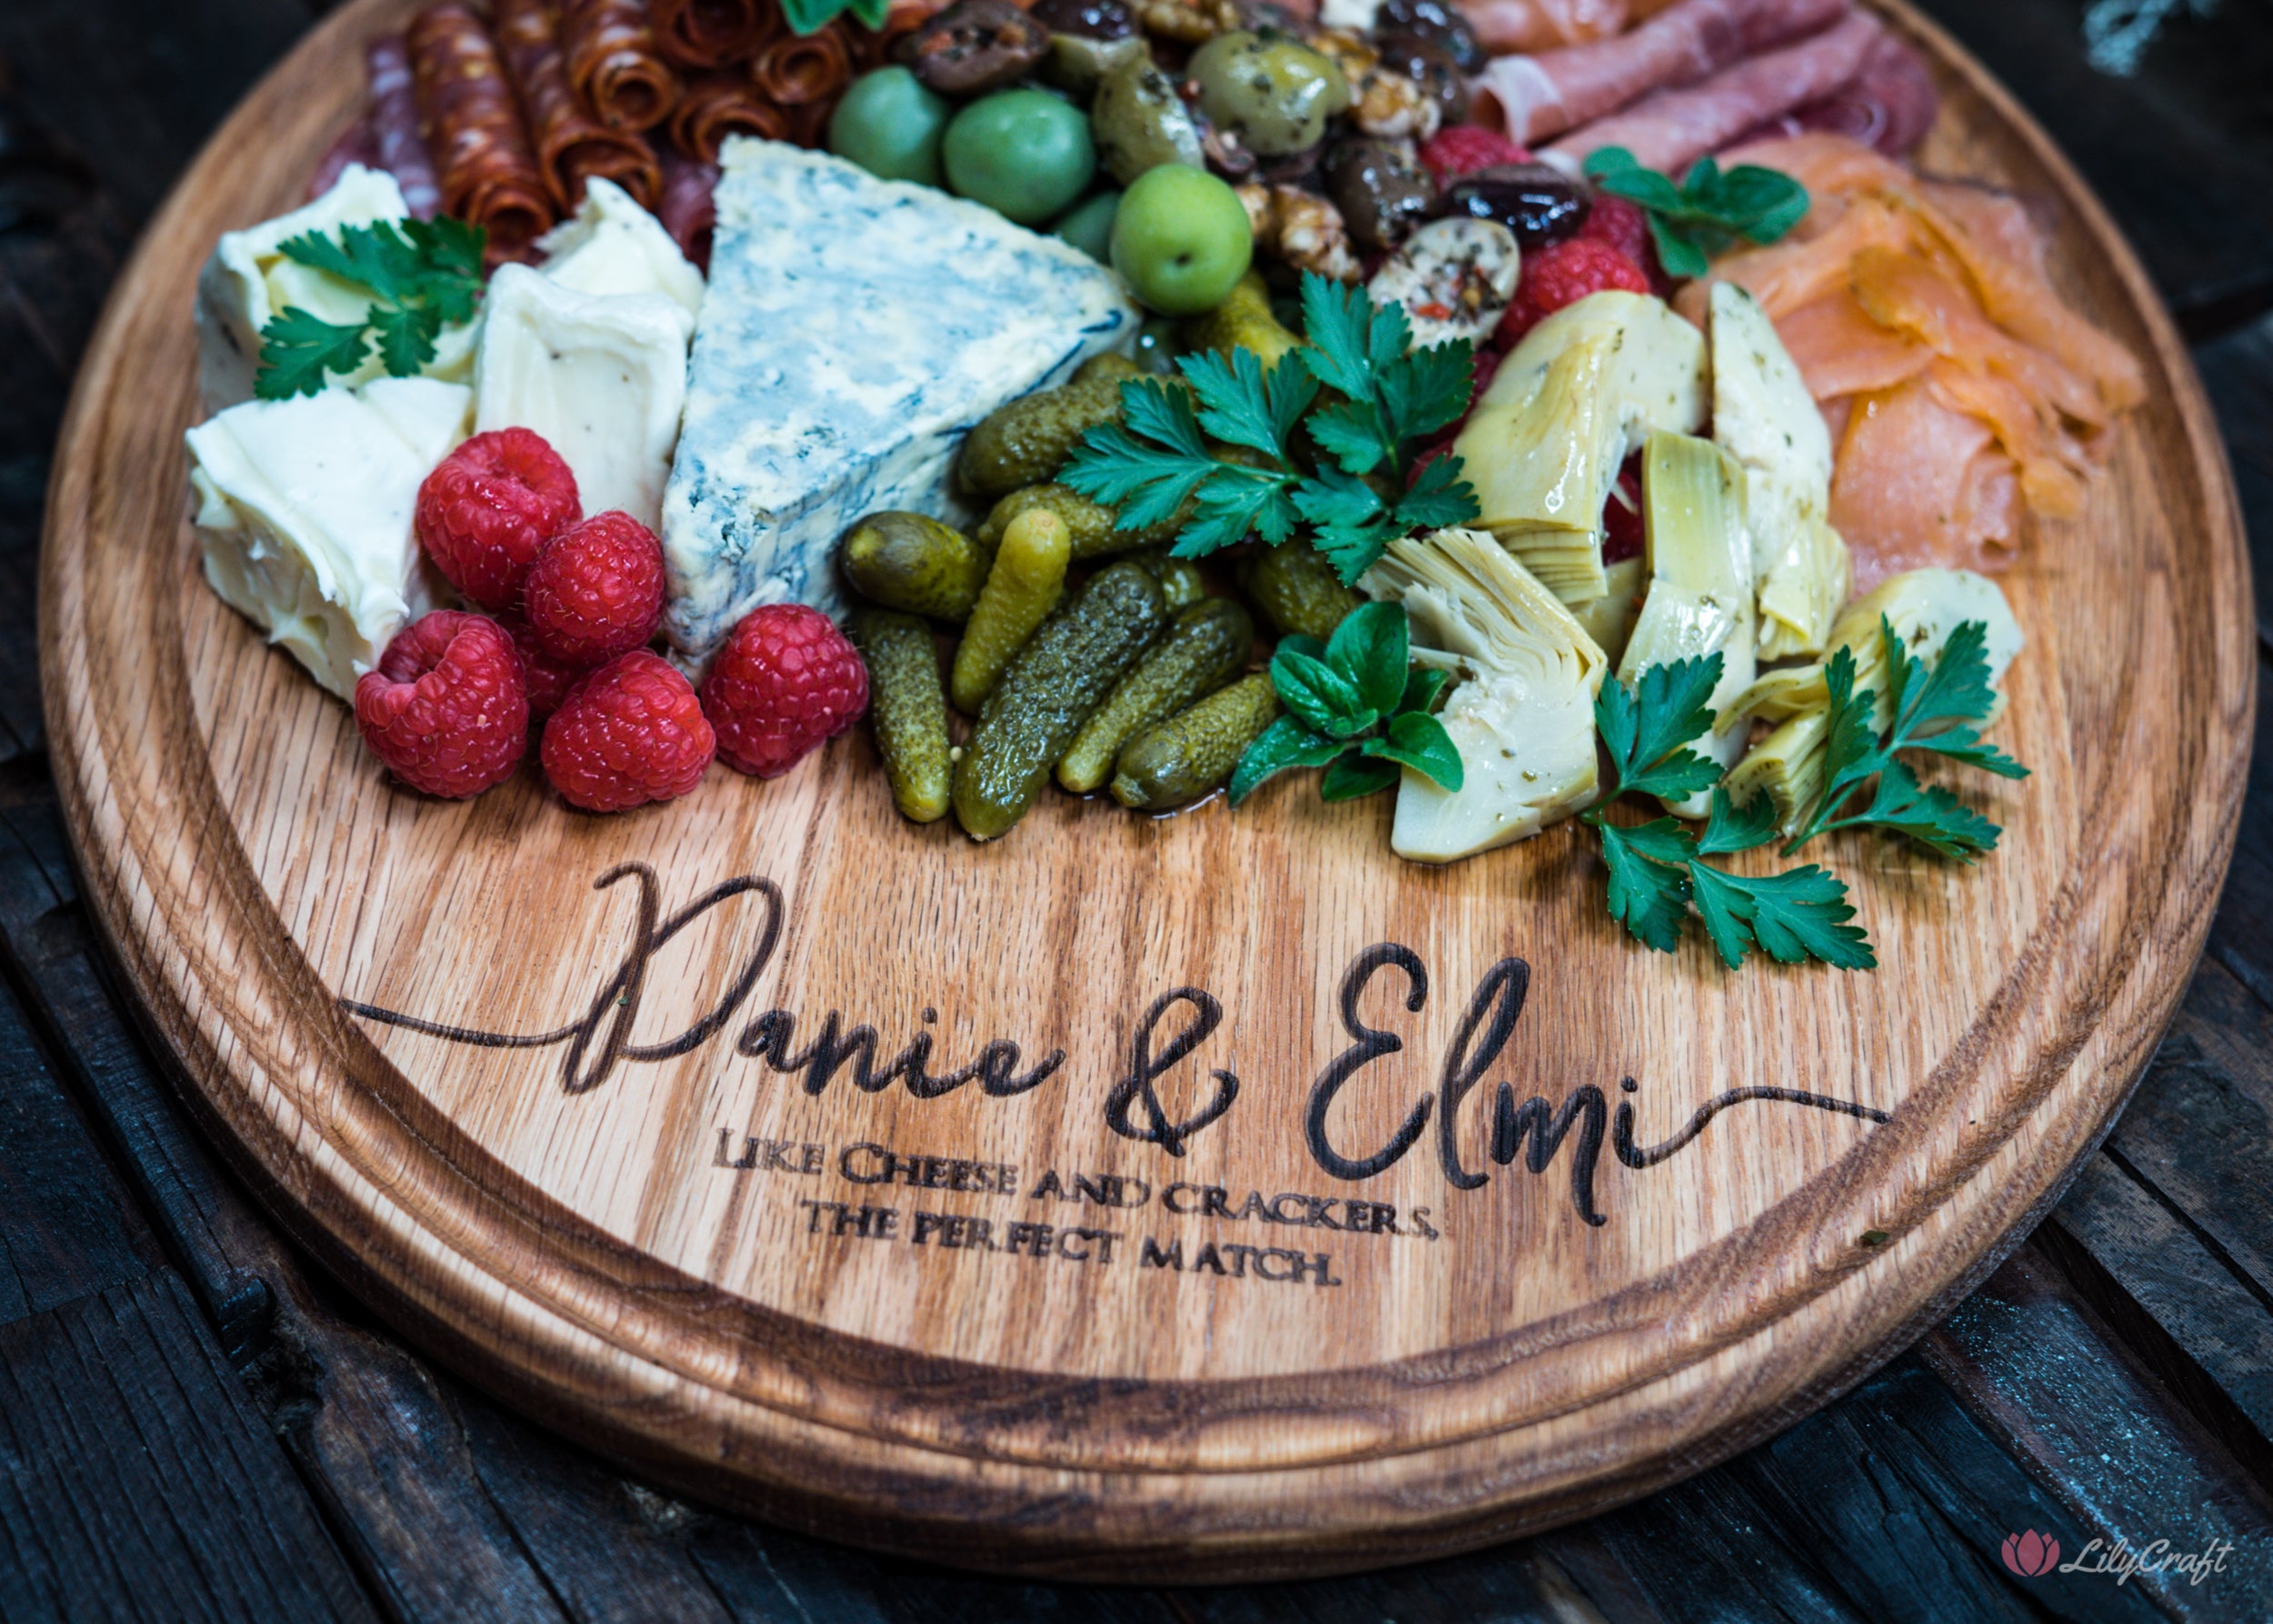 Our cheeseboard features a practical juice groove design, perfect for capturing the deliciousness of your culinary creations. Ideal for your next holiday entertaining showcase.